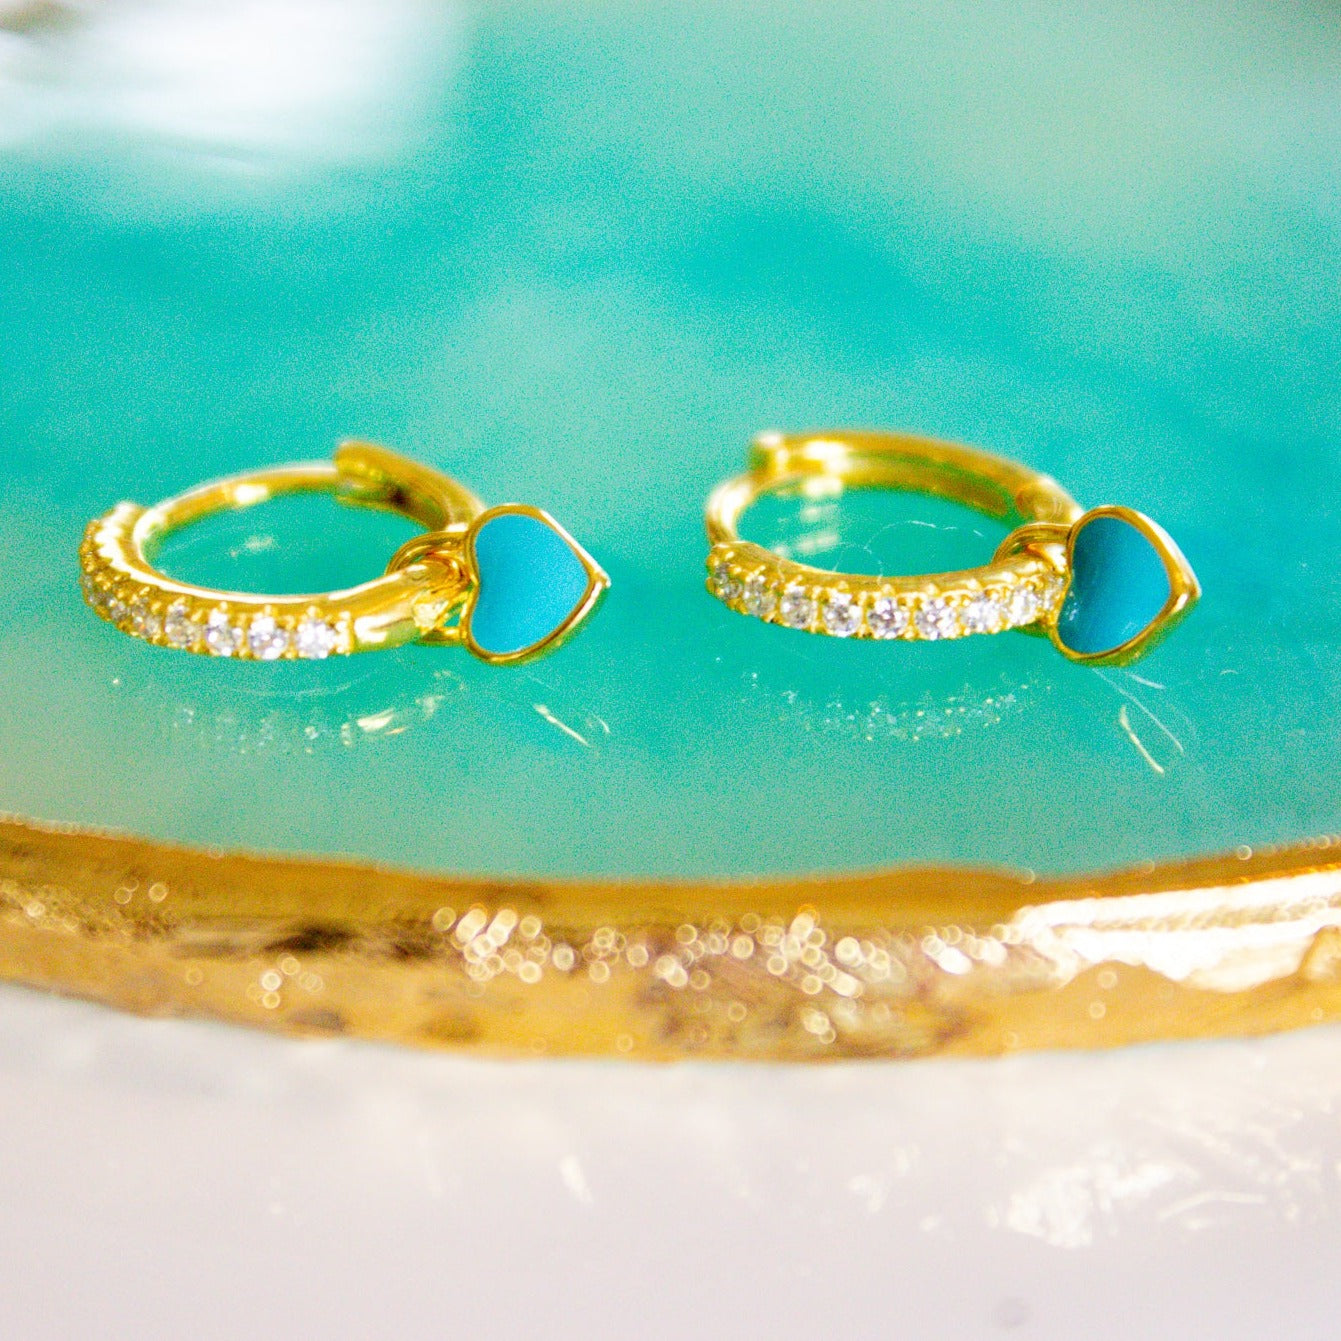 gold hoops with teal heart charms